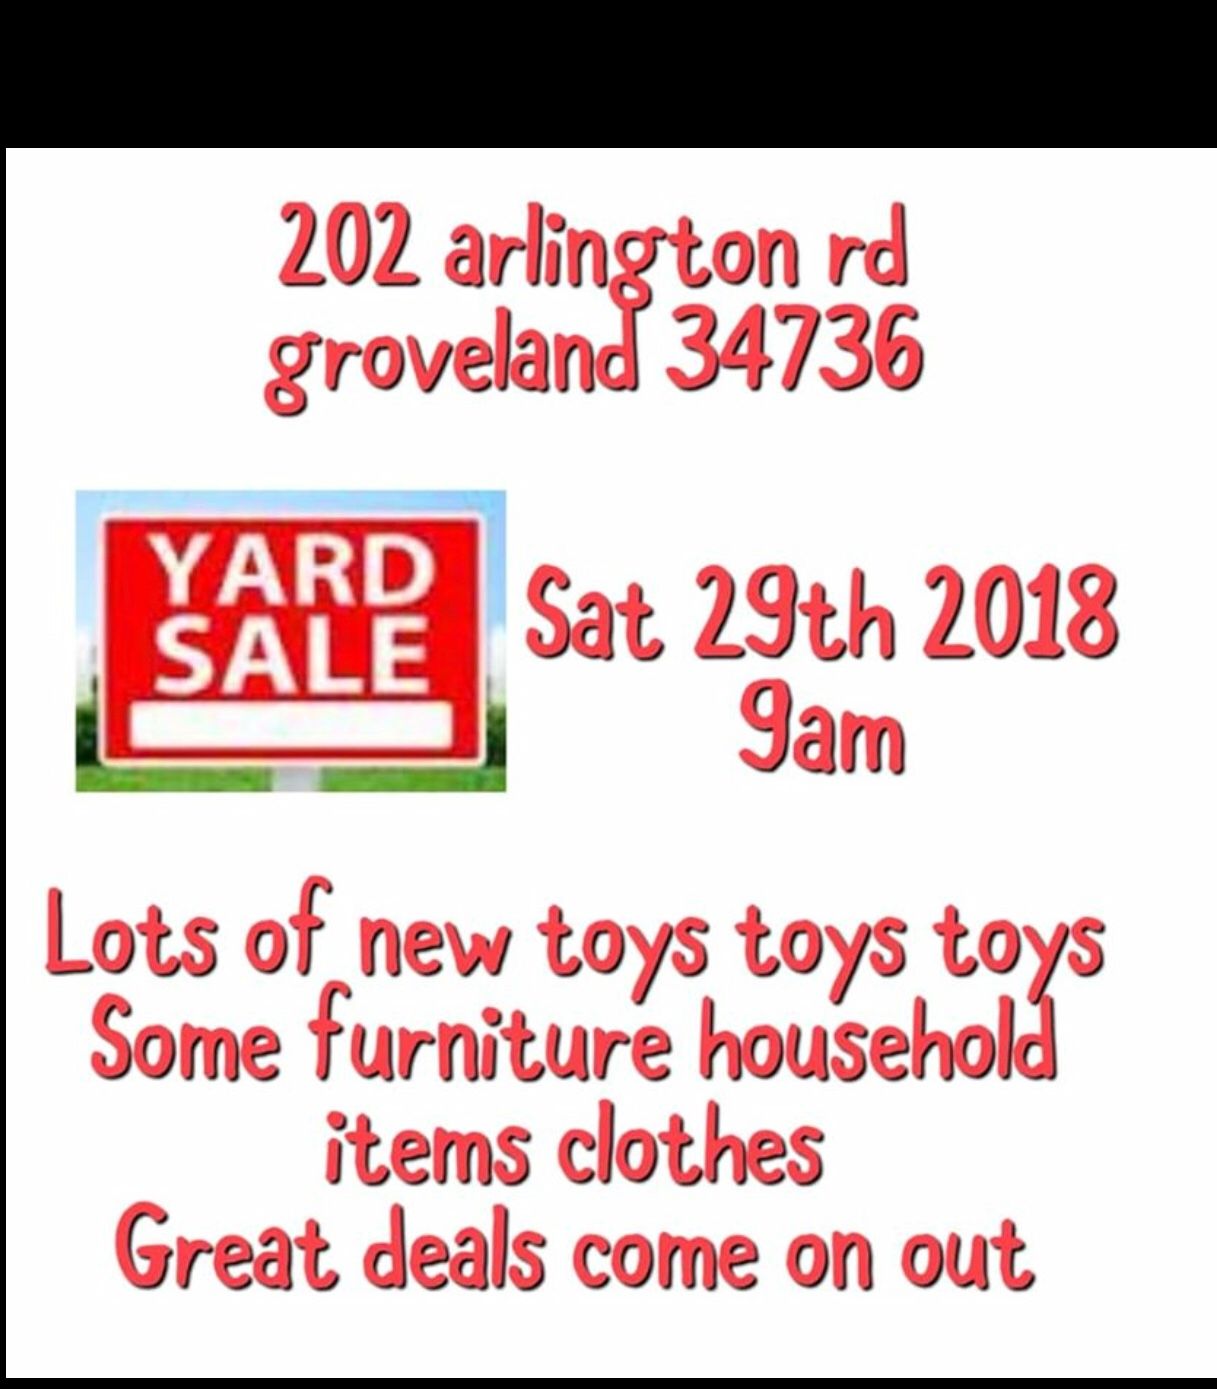 Toys-clothing-dishes-Atv-powerwheels-bedroom sets-ALL NEW!-glasses-purses-